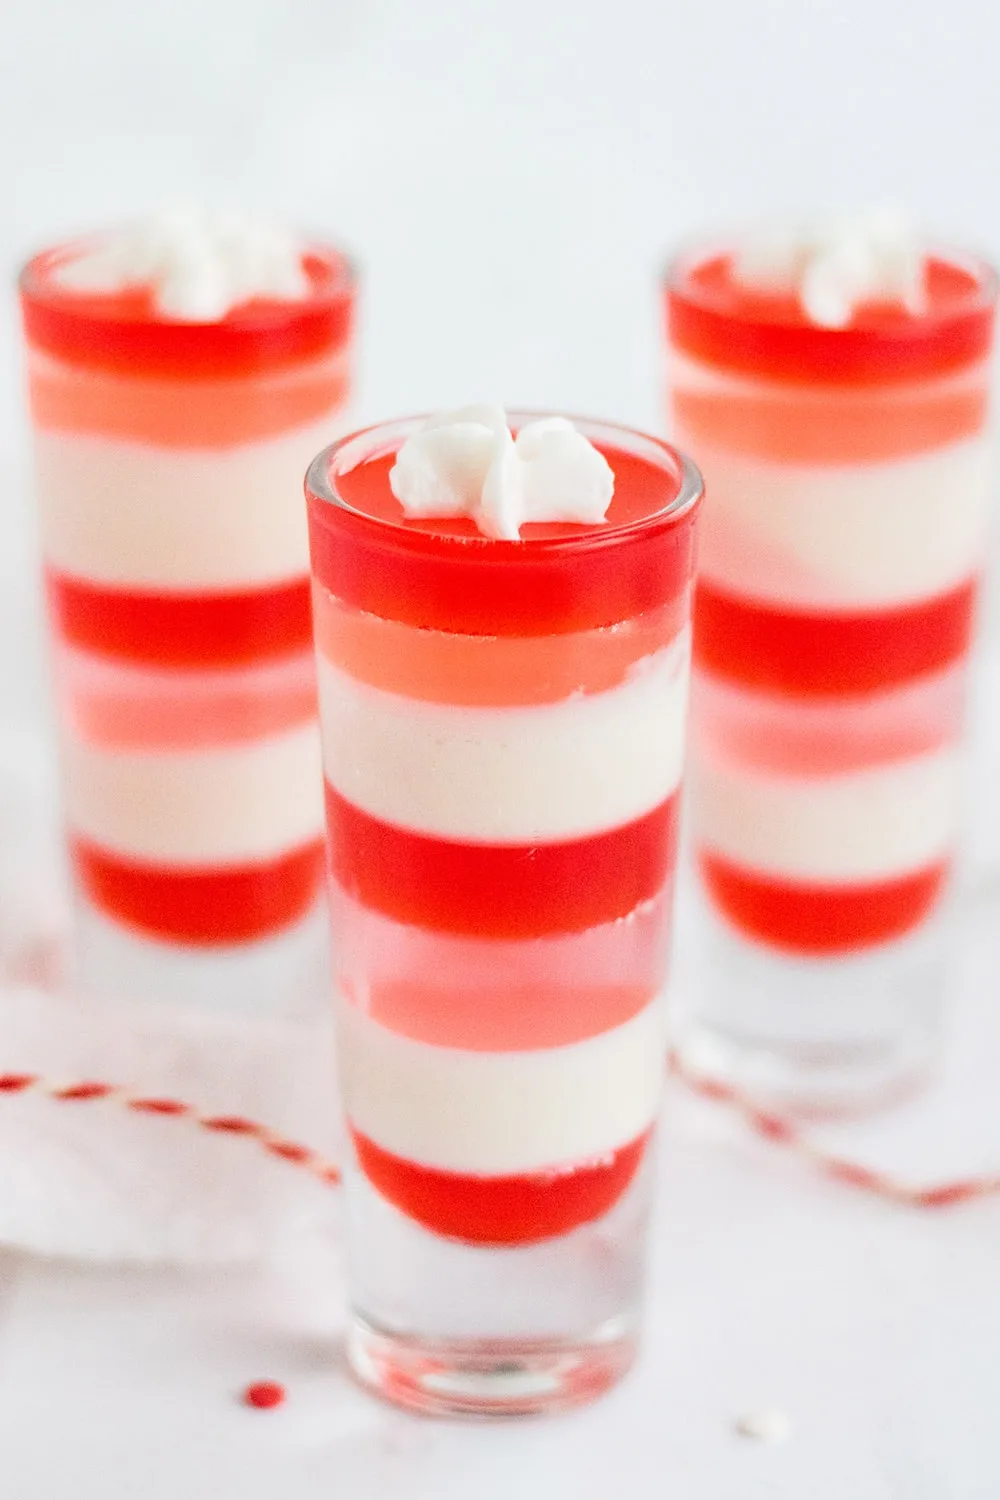 Three shooter glasses with layers of white, pink, and red gelatin.